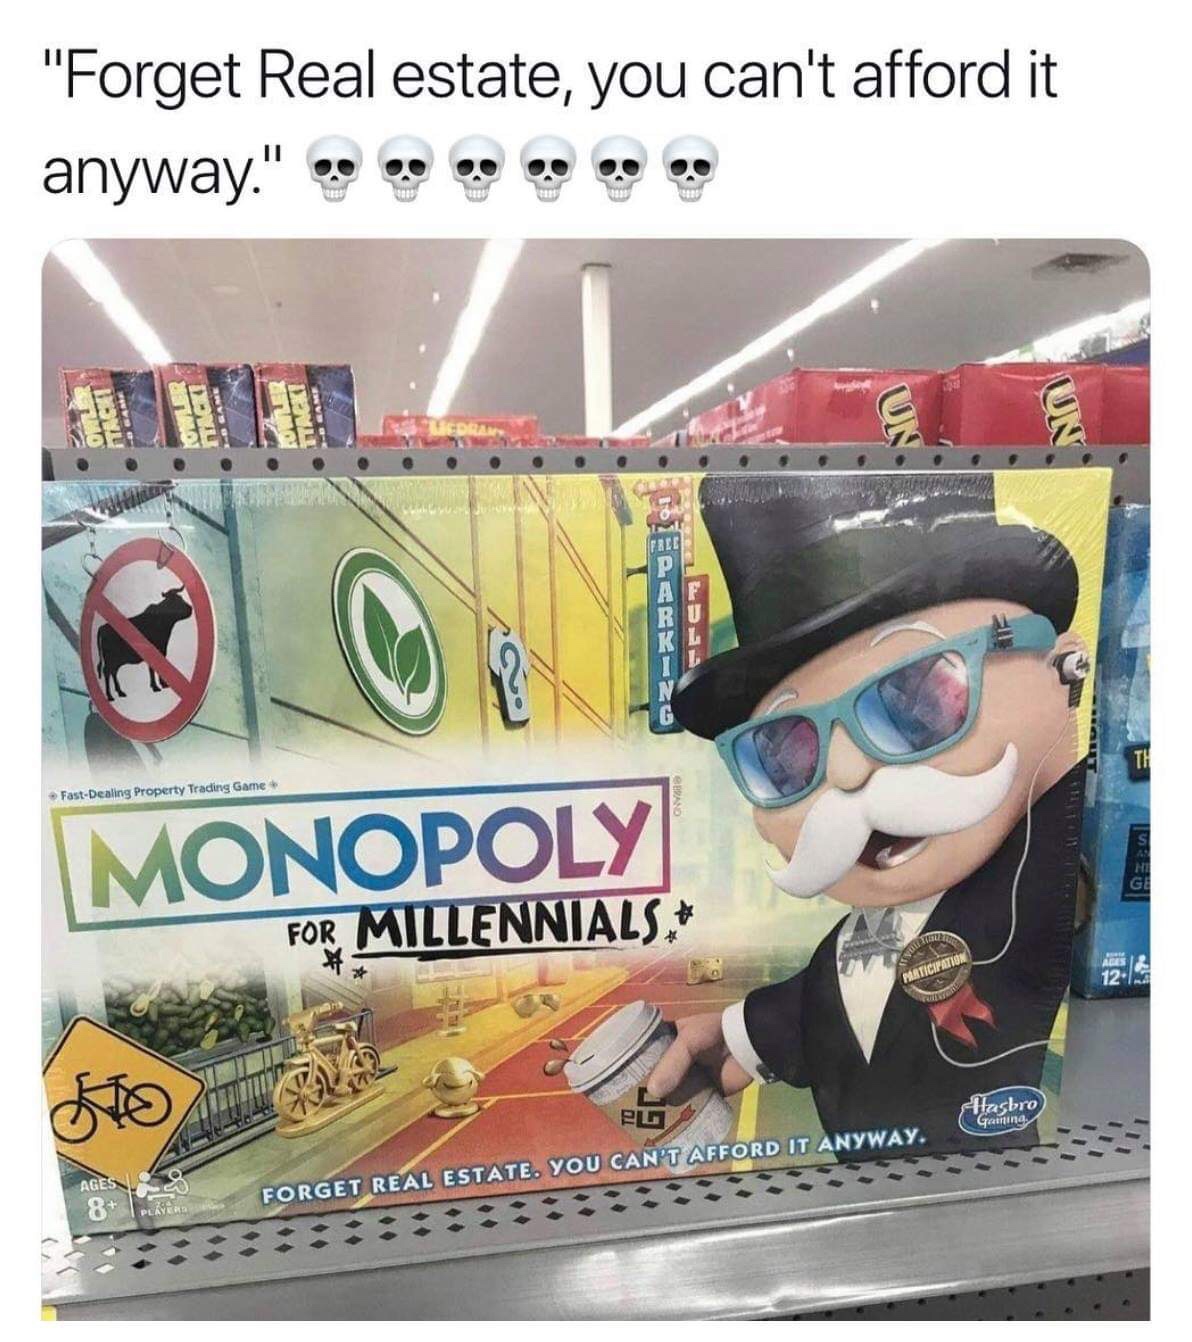 monopoly for millennials -